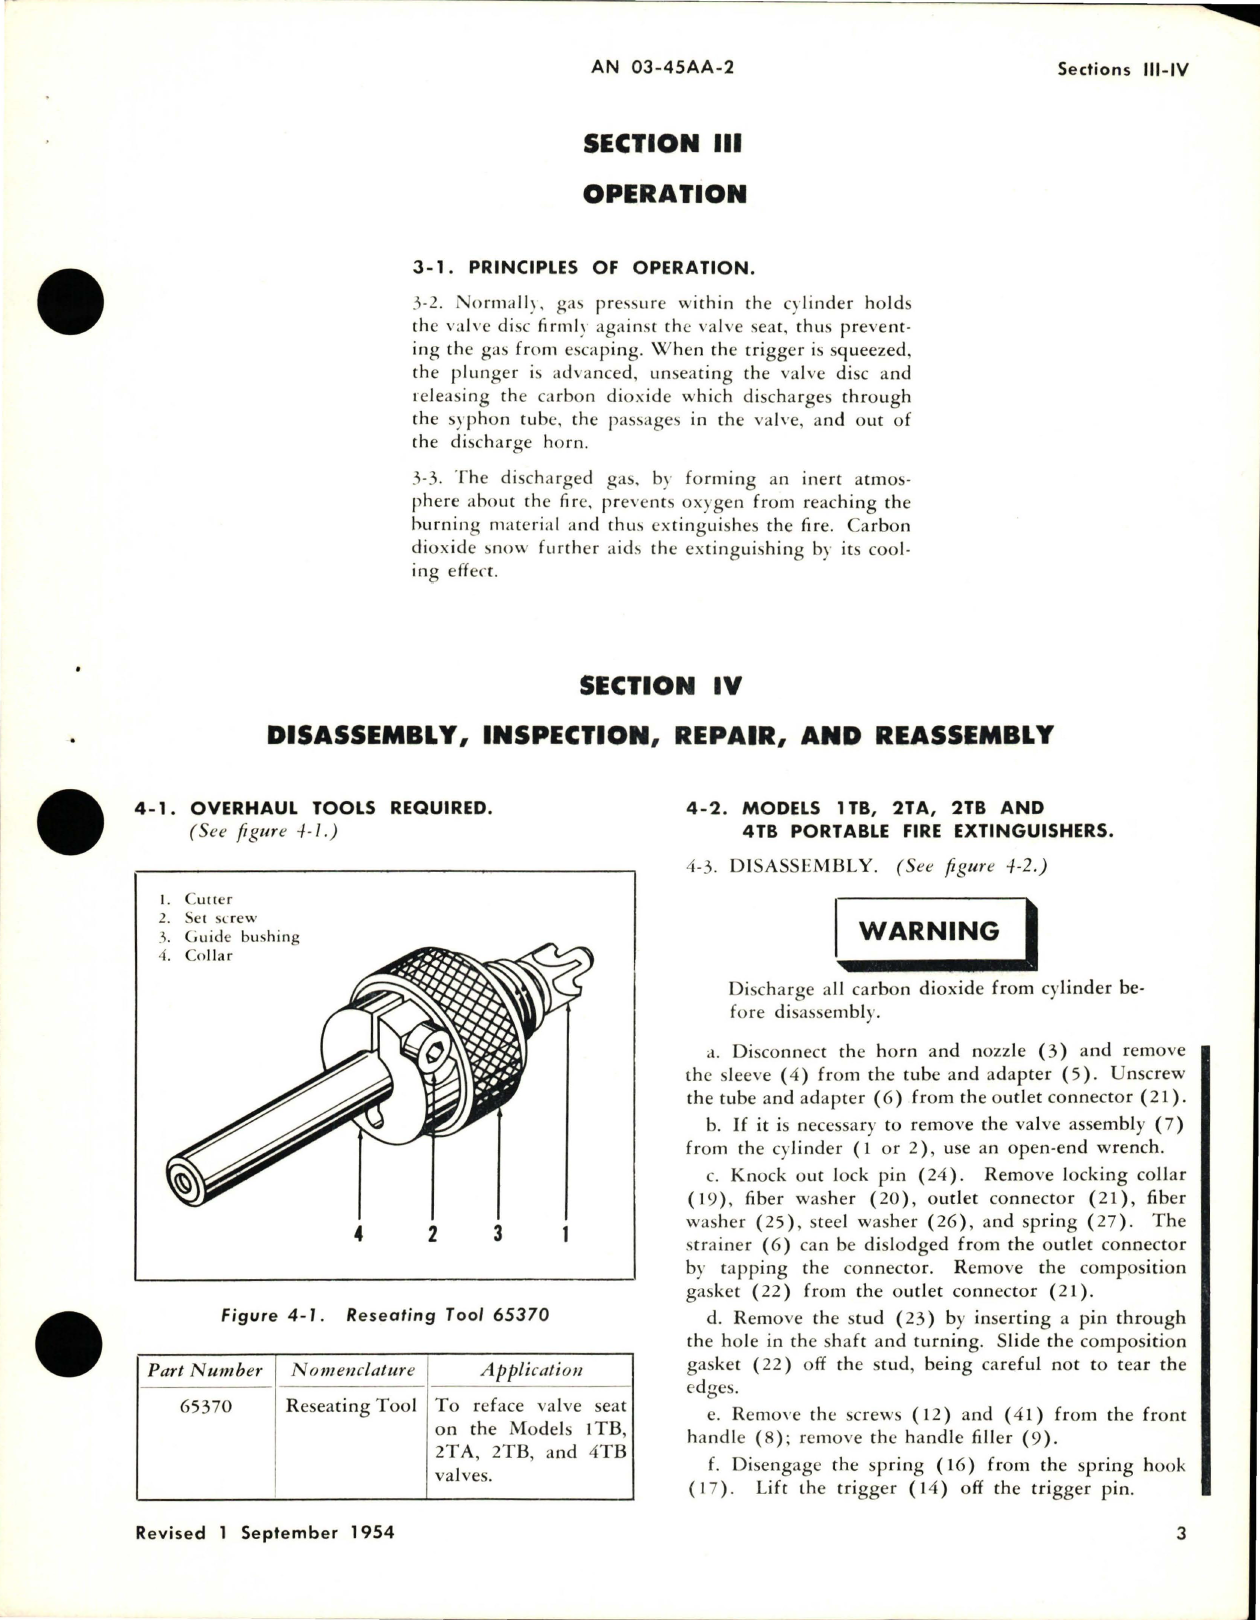 Sample page 5 from AirCorps Library document: Overhaul Instructions for CO2 Portable Fire Extinguishers - Models 1TB, 2TA, 2TB, 4TB, and 5TA